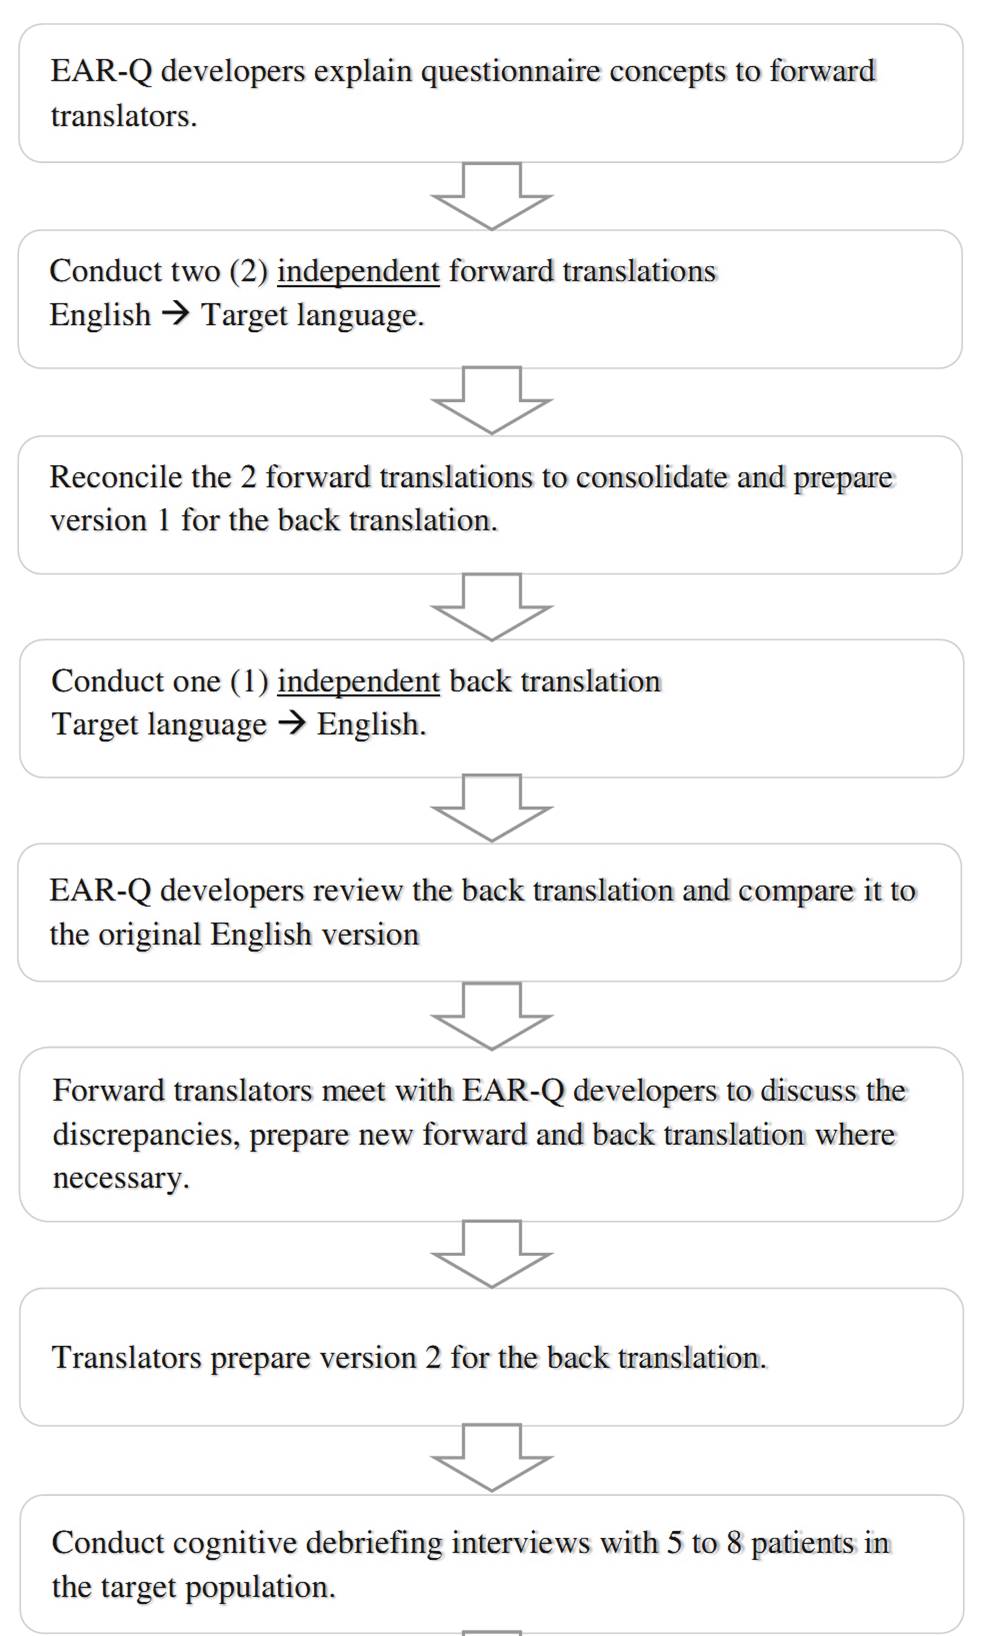 Translation and cultural adaptation of the EAR-Q into Arabic, Chinese, French and Spanish for use in an international field-test study